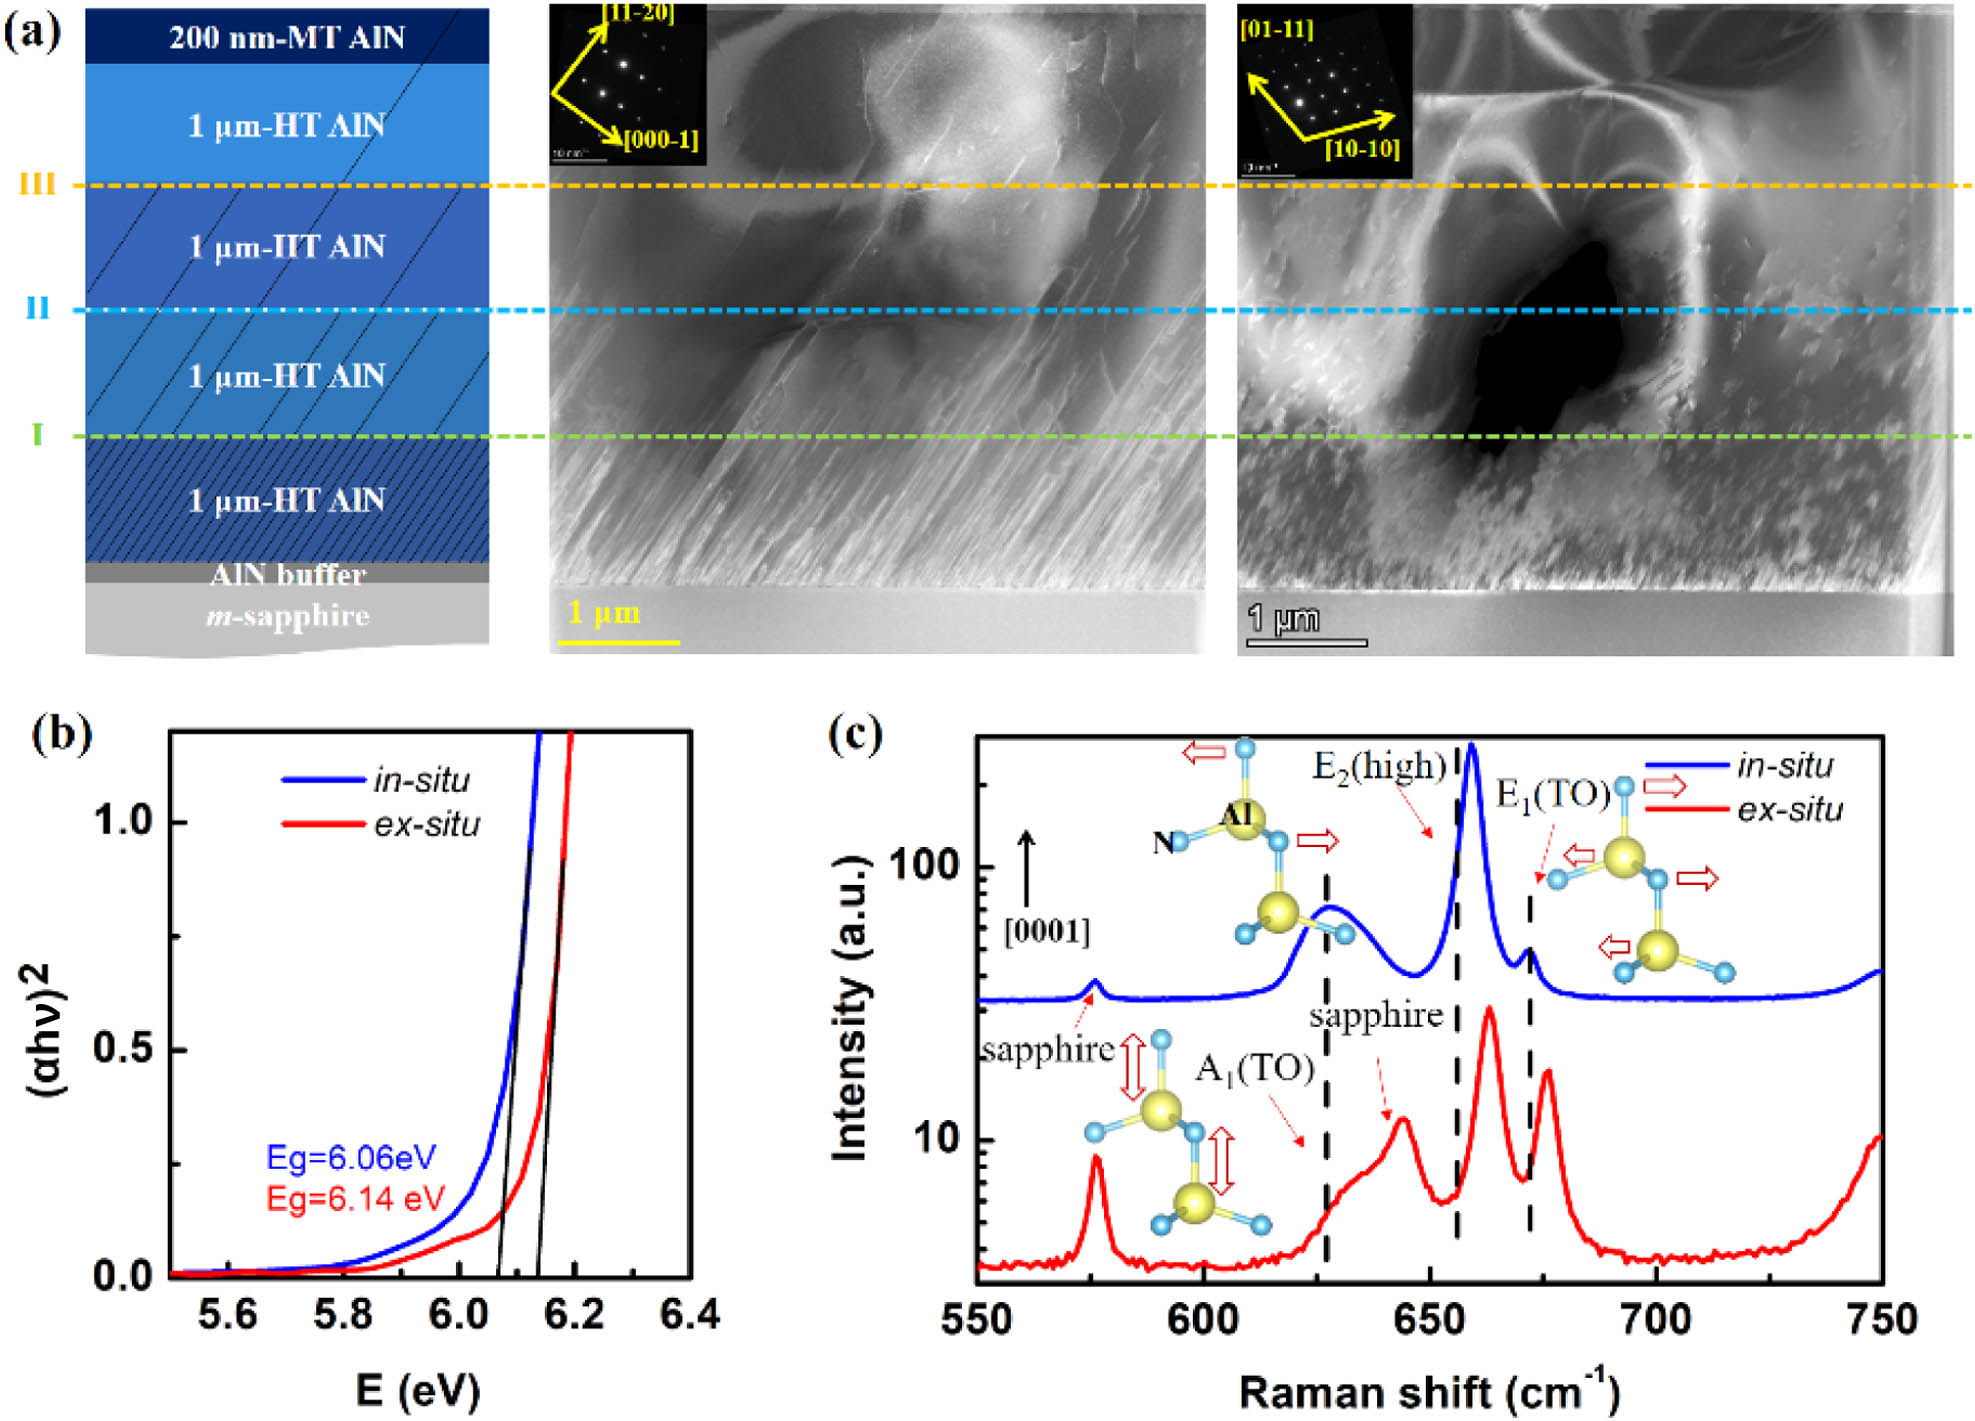 (a) ADF images of in situ treated AlN template taken along [11¯00] and [112¯3] zone axes. (b) Optical transmission spectra and (c) Raman spectra of in situ and ex situ treated AlN templates.